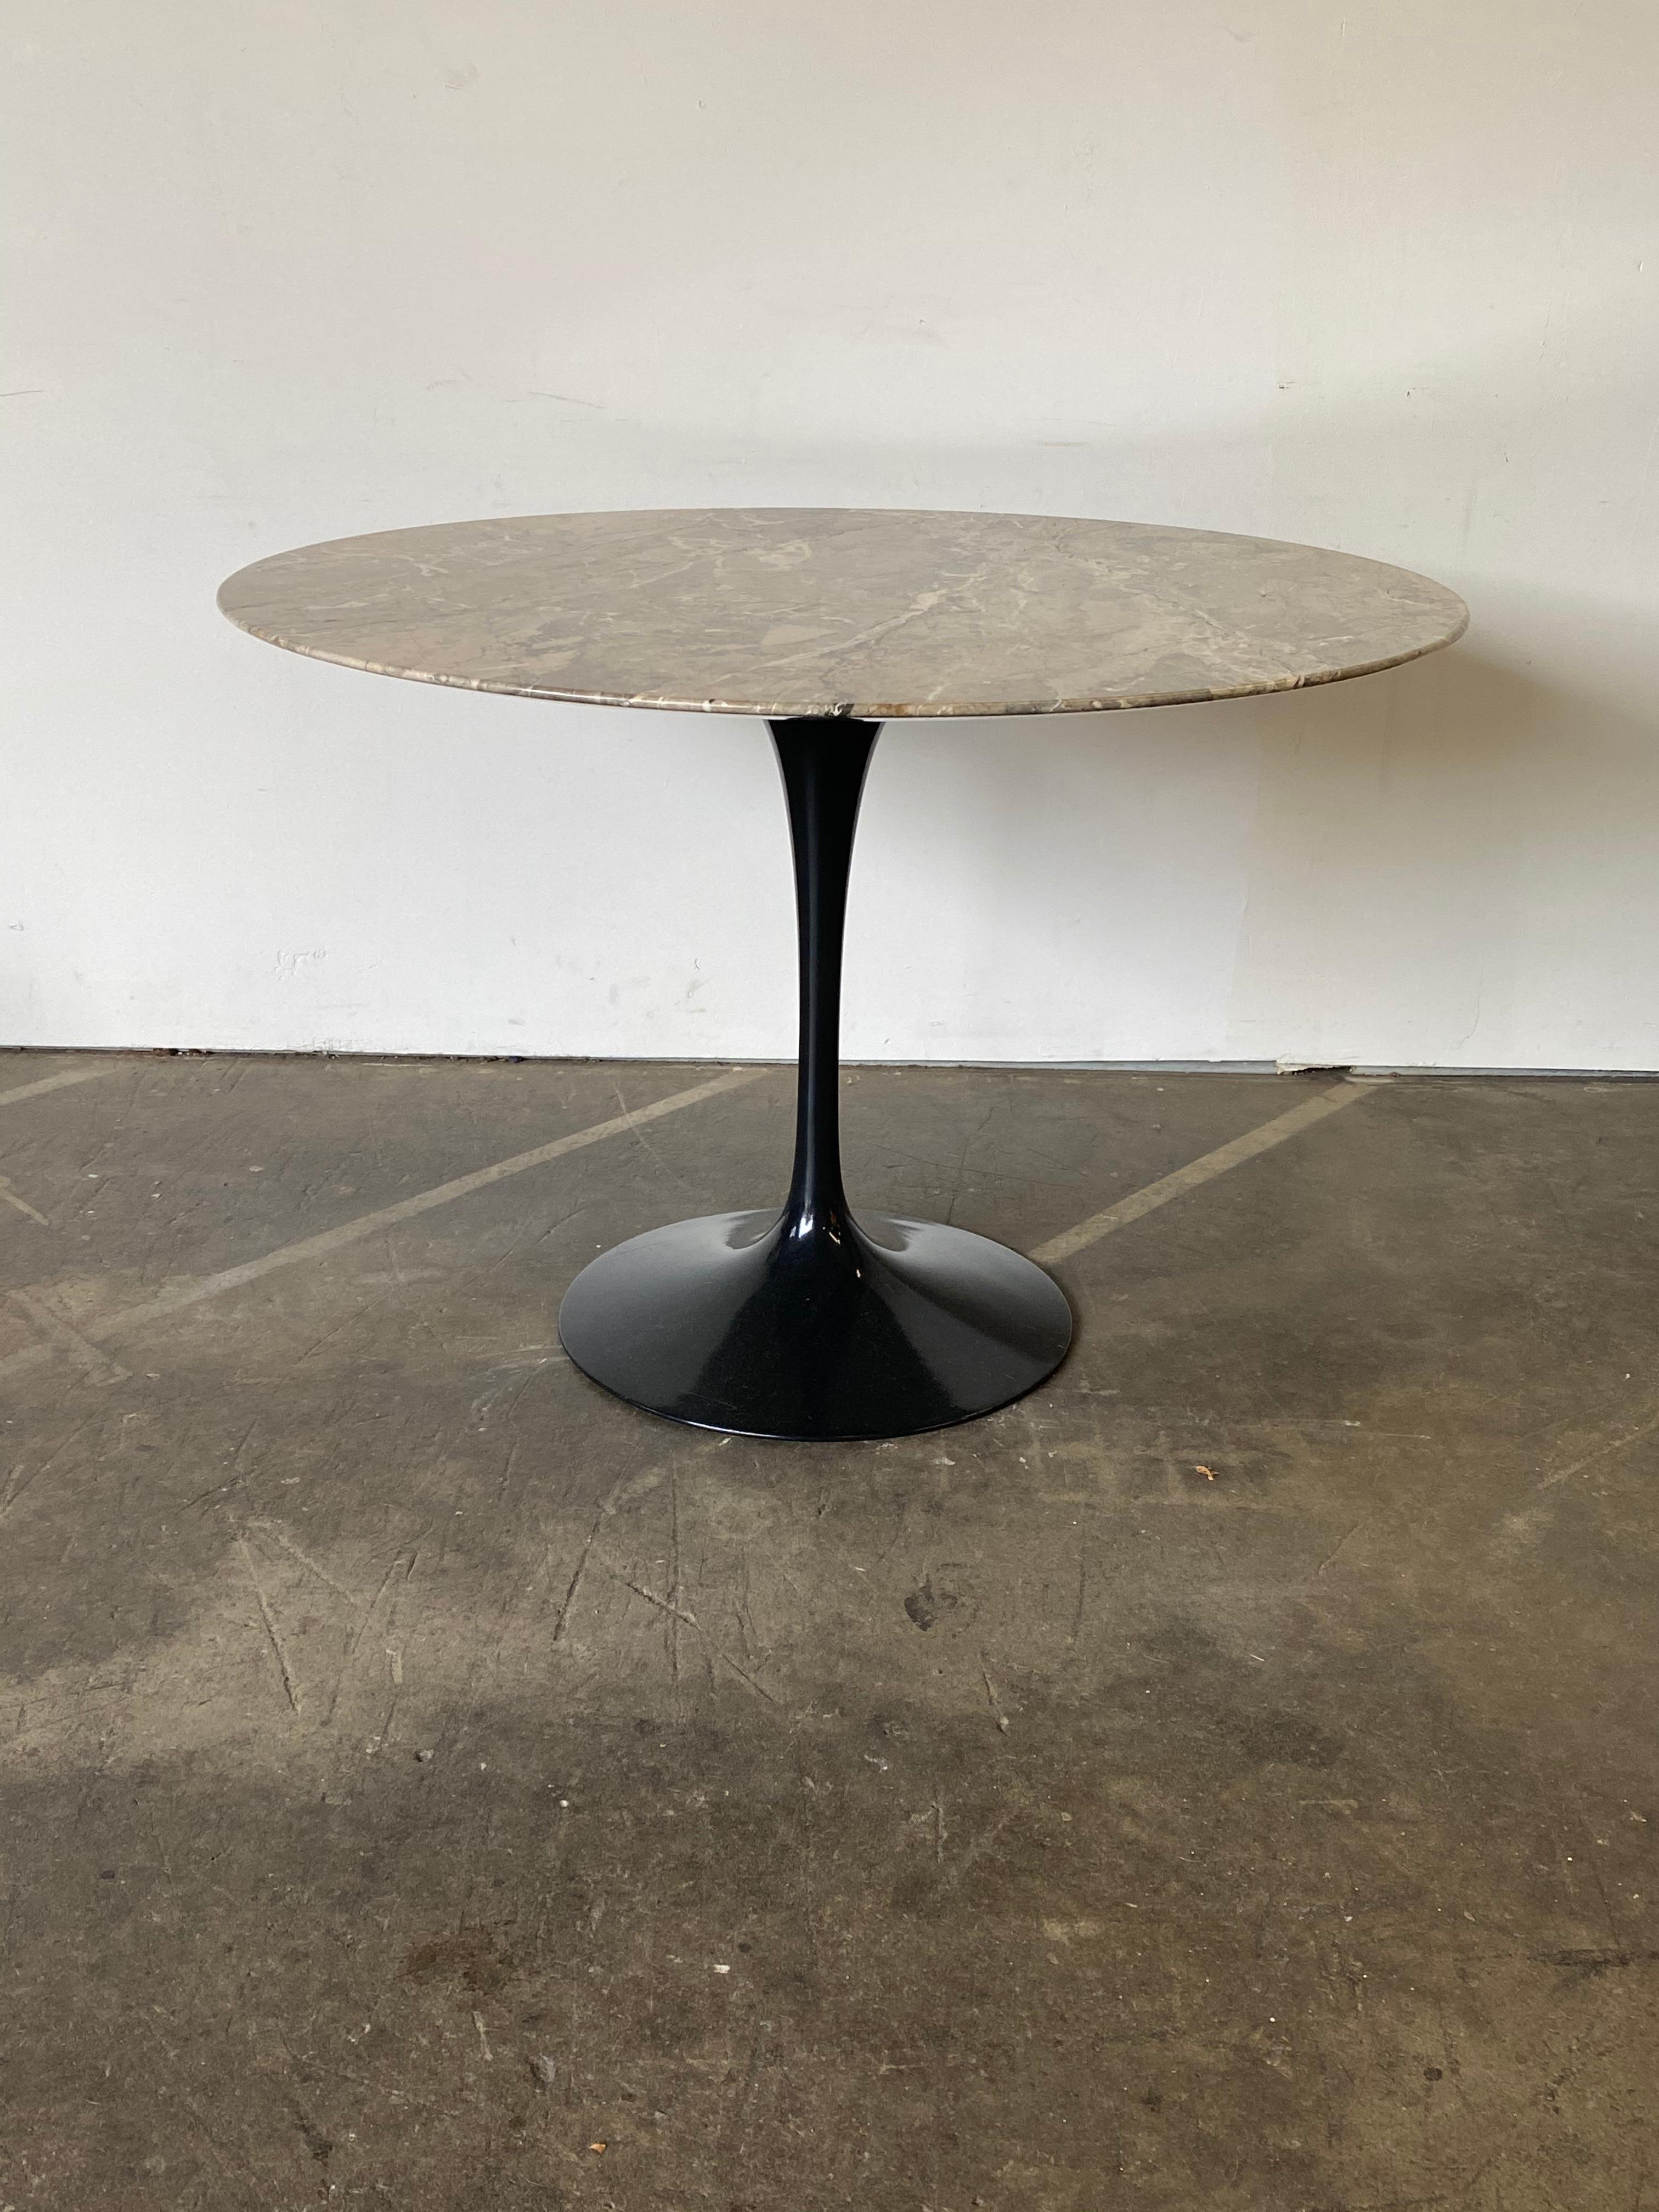 Circular dining table with 42” diameter marble top. Designed by Eero Saarinen for Knoll. Signed and guaranteed authentic. Gorgeous vein pattern and colors with classic Knoll knife edge slab atop cast aluminum powder coated base.